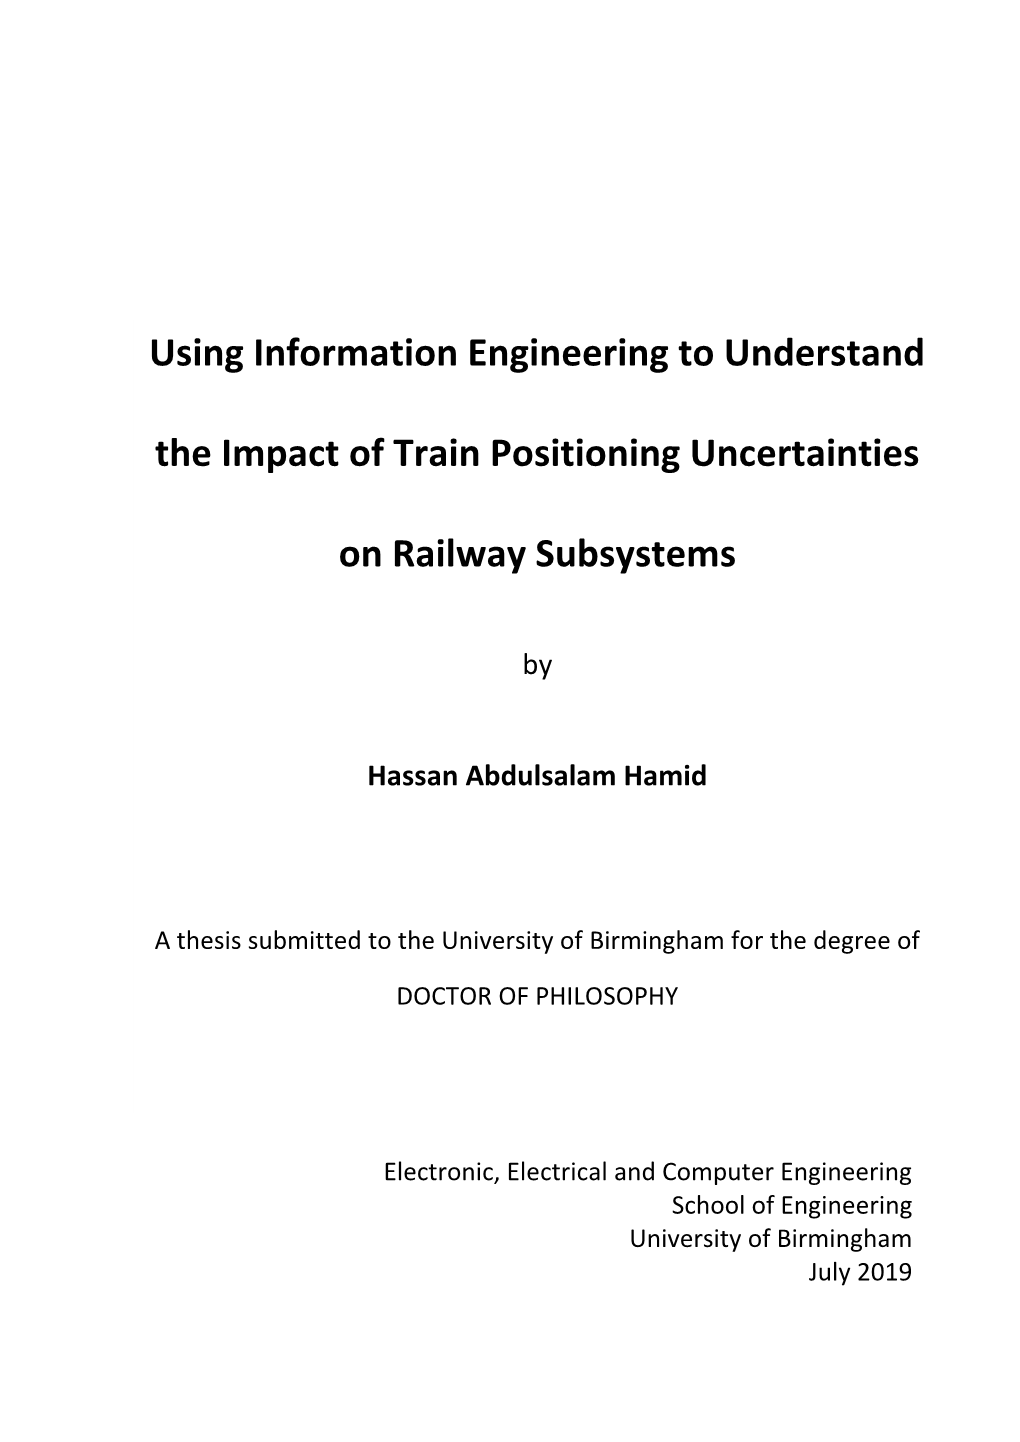 Using Information Engineering to Understand the Impact of Train Positioning Uncertainties